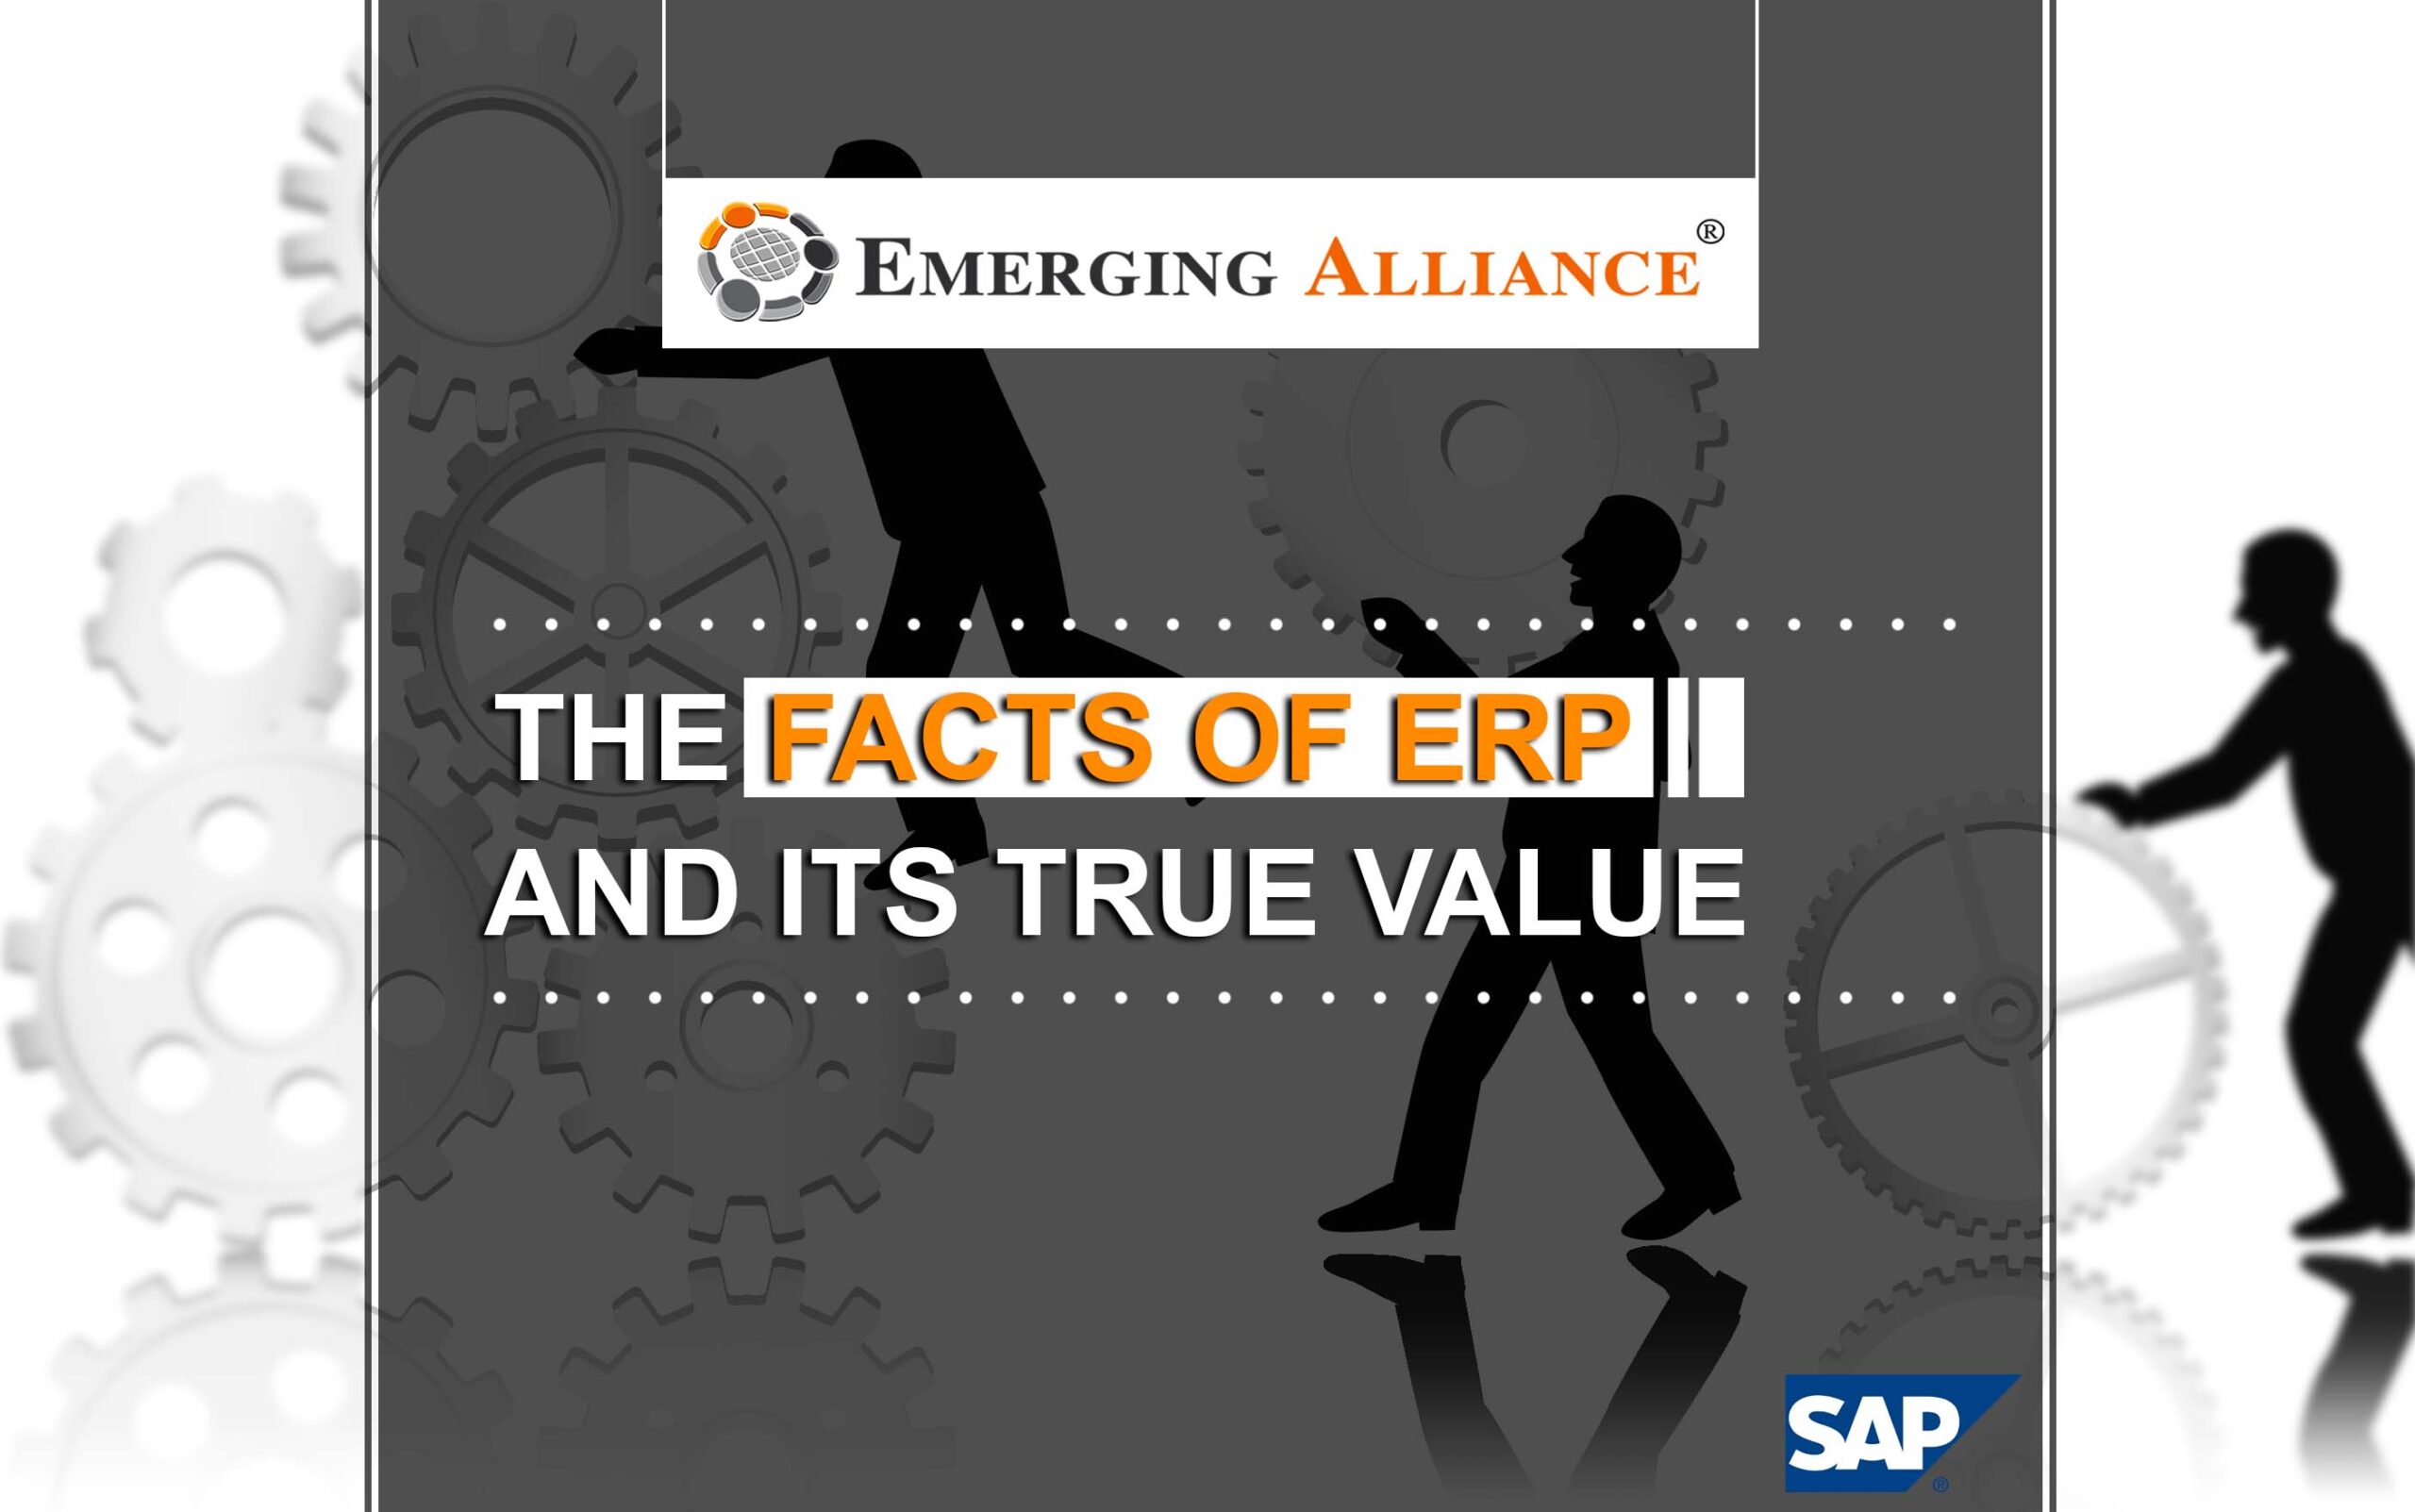 facts of erp and its true value - SAP